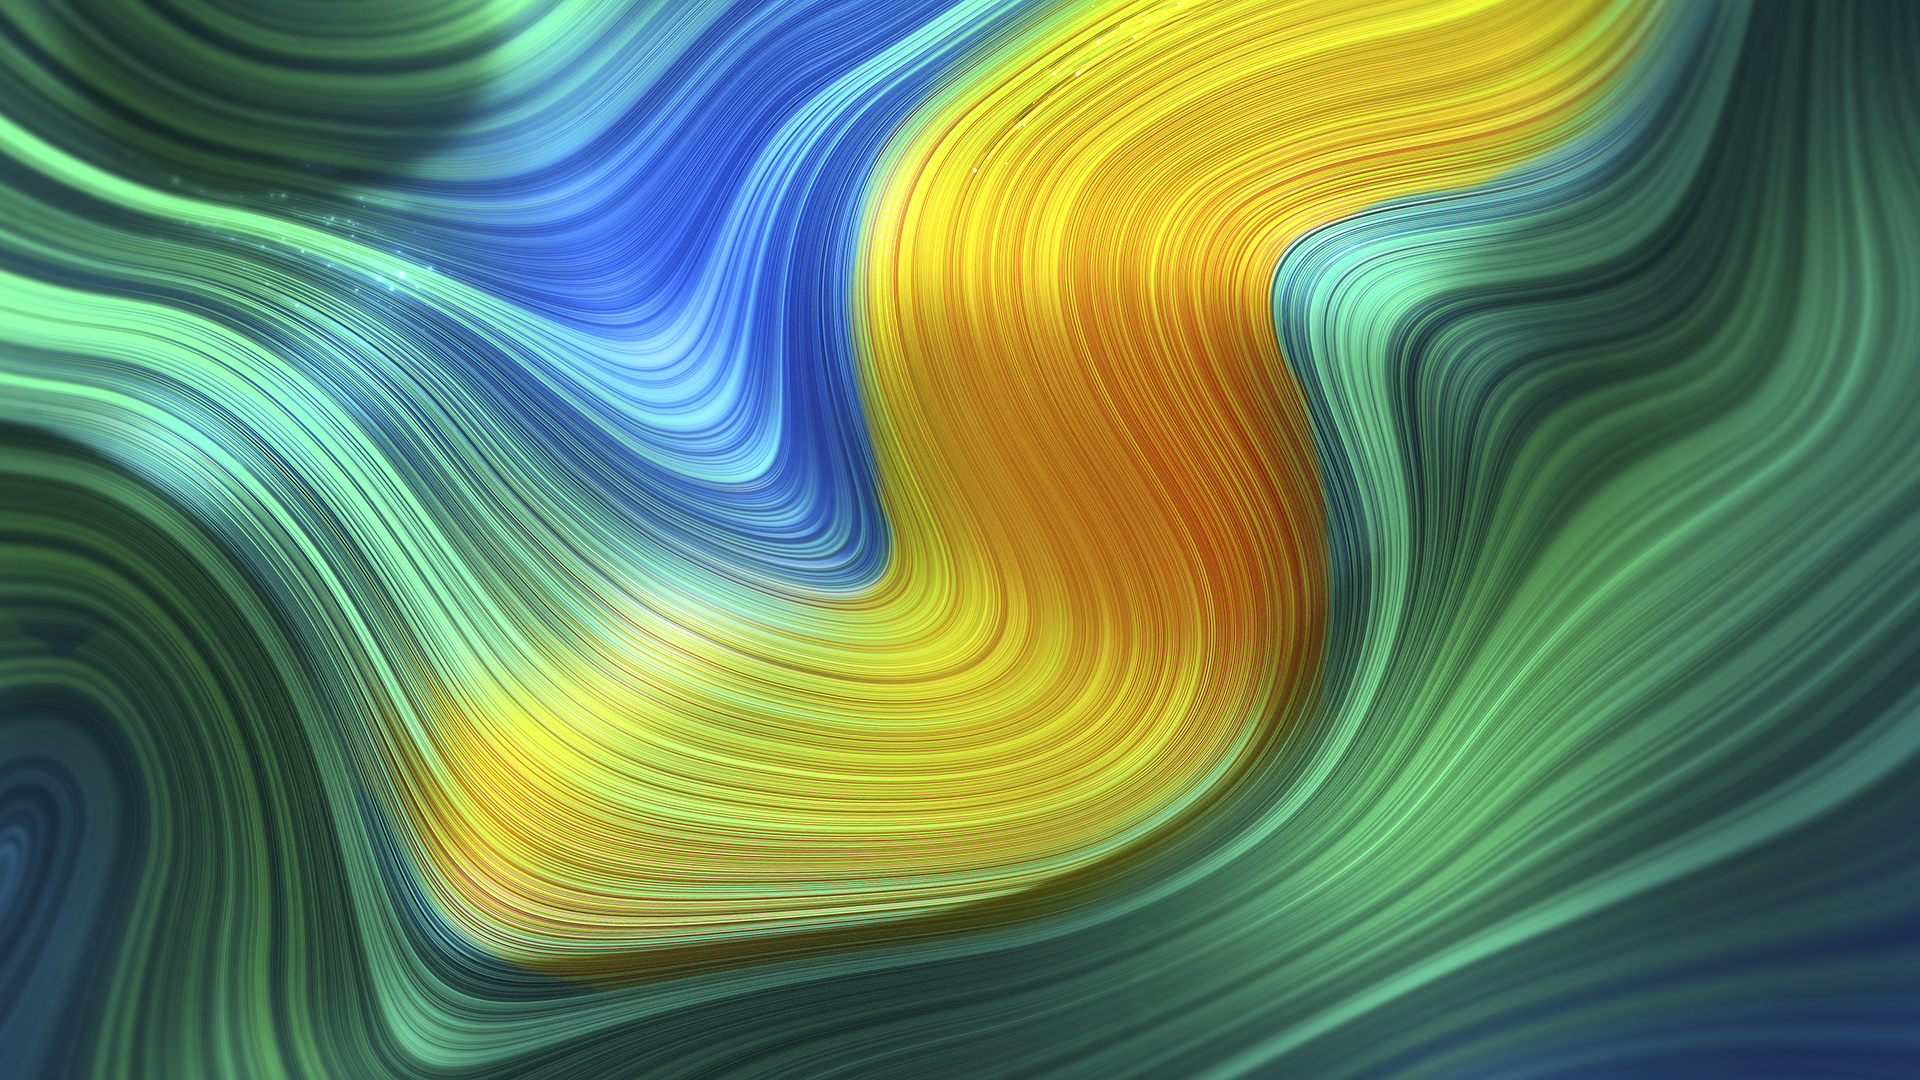 hd wallpapers for laptop,blue,green,fractal art,yellow,wave